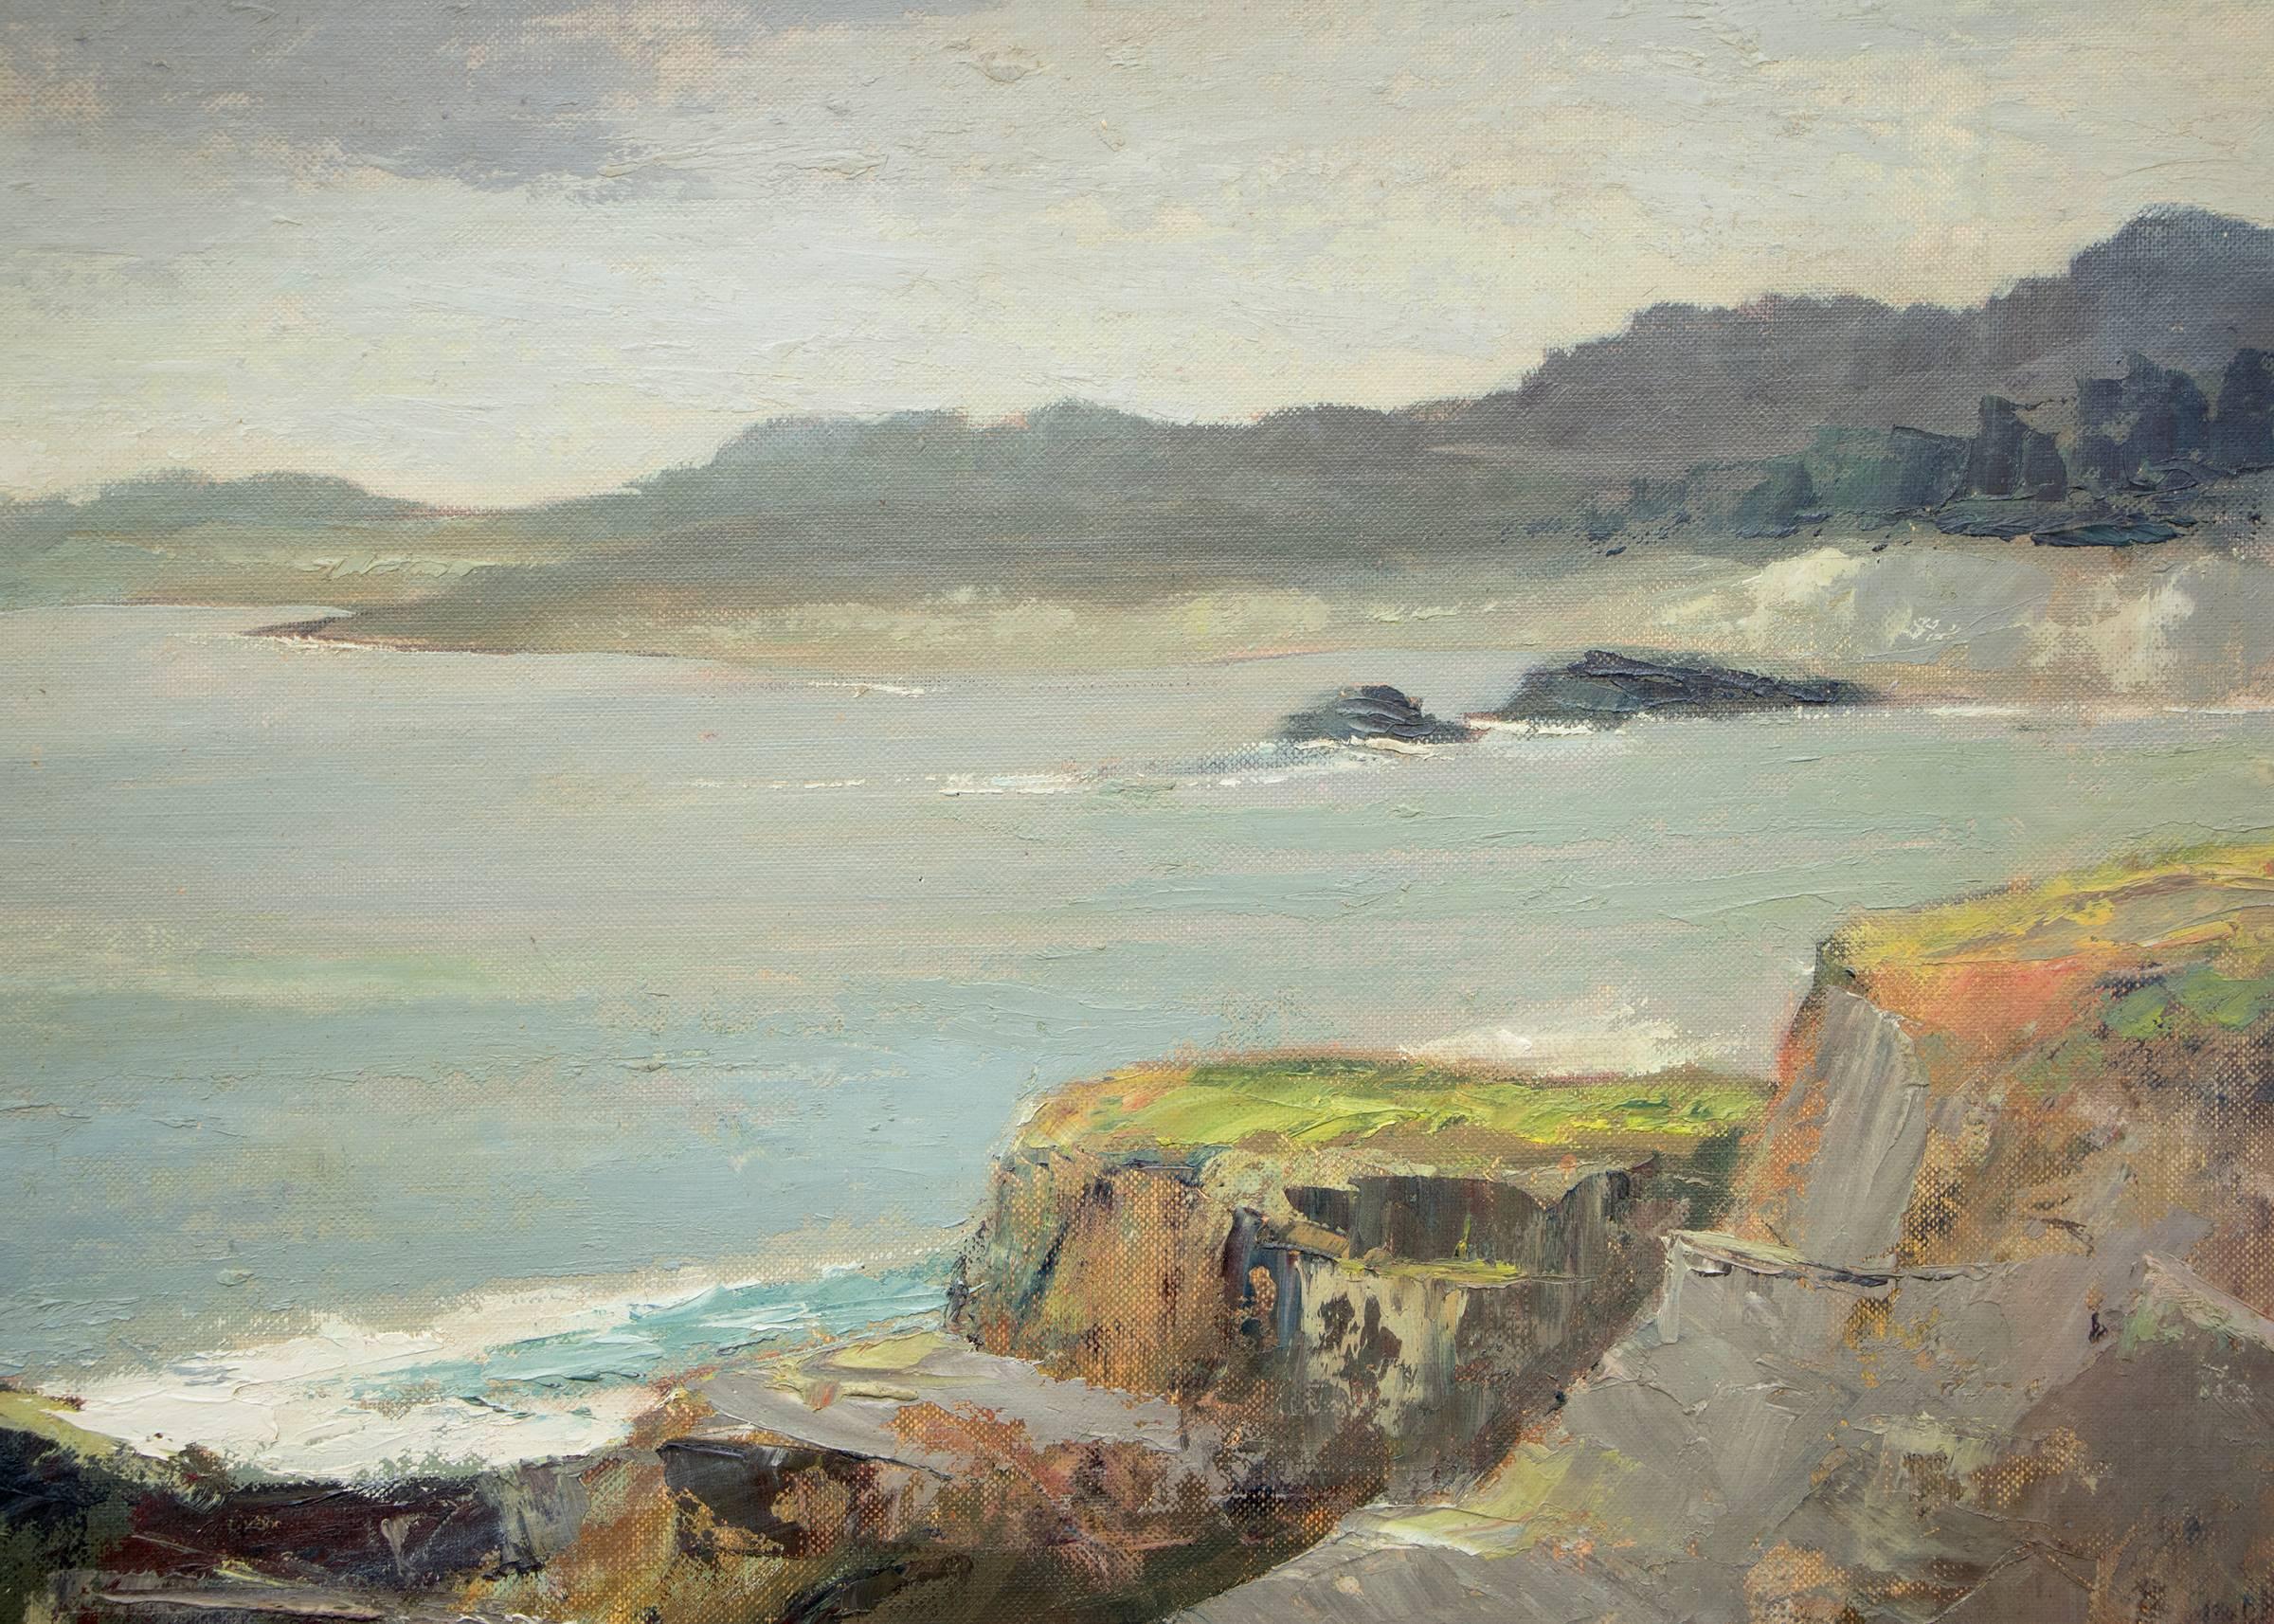 West of Mendocino, Northern California Coast Marine Seascape/Landscape Painting - Brown Figurative Painting by Jon Blanchette